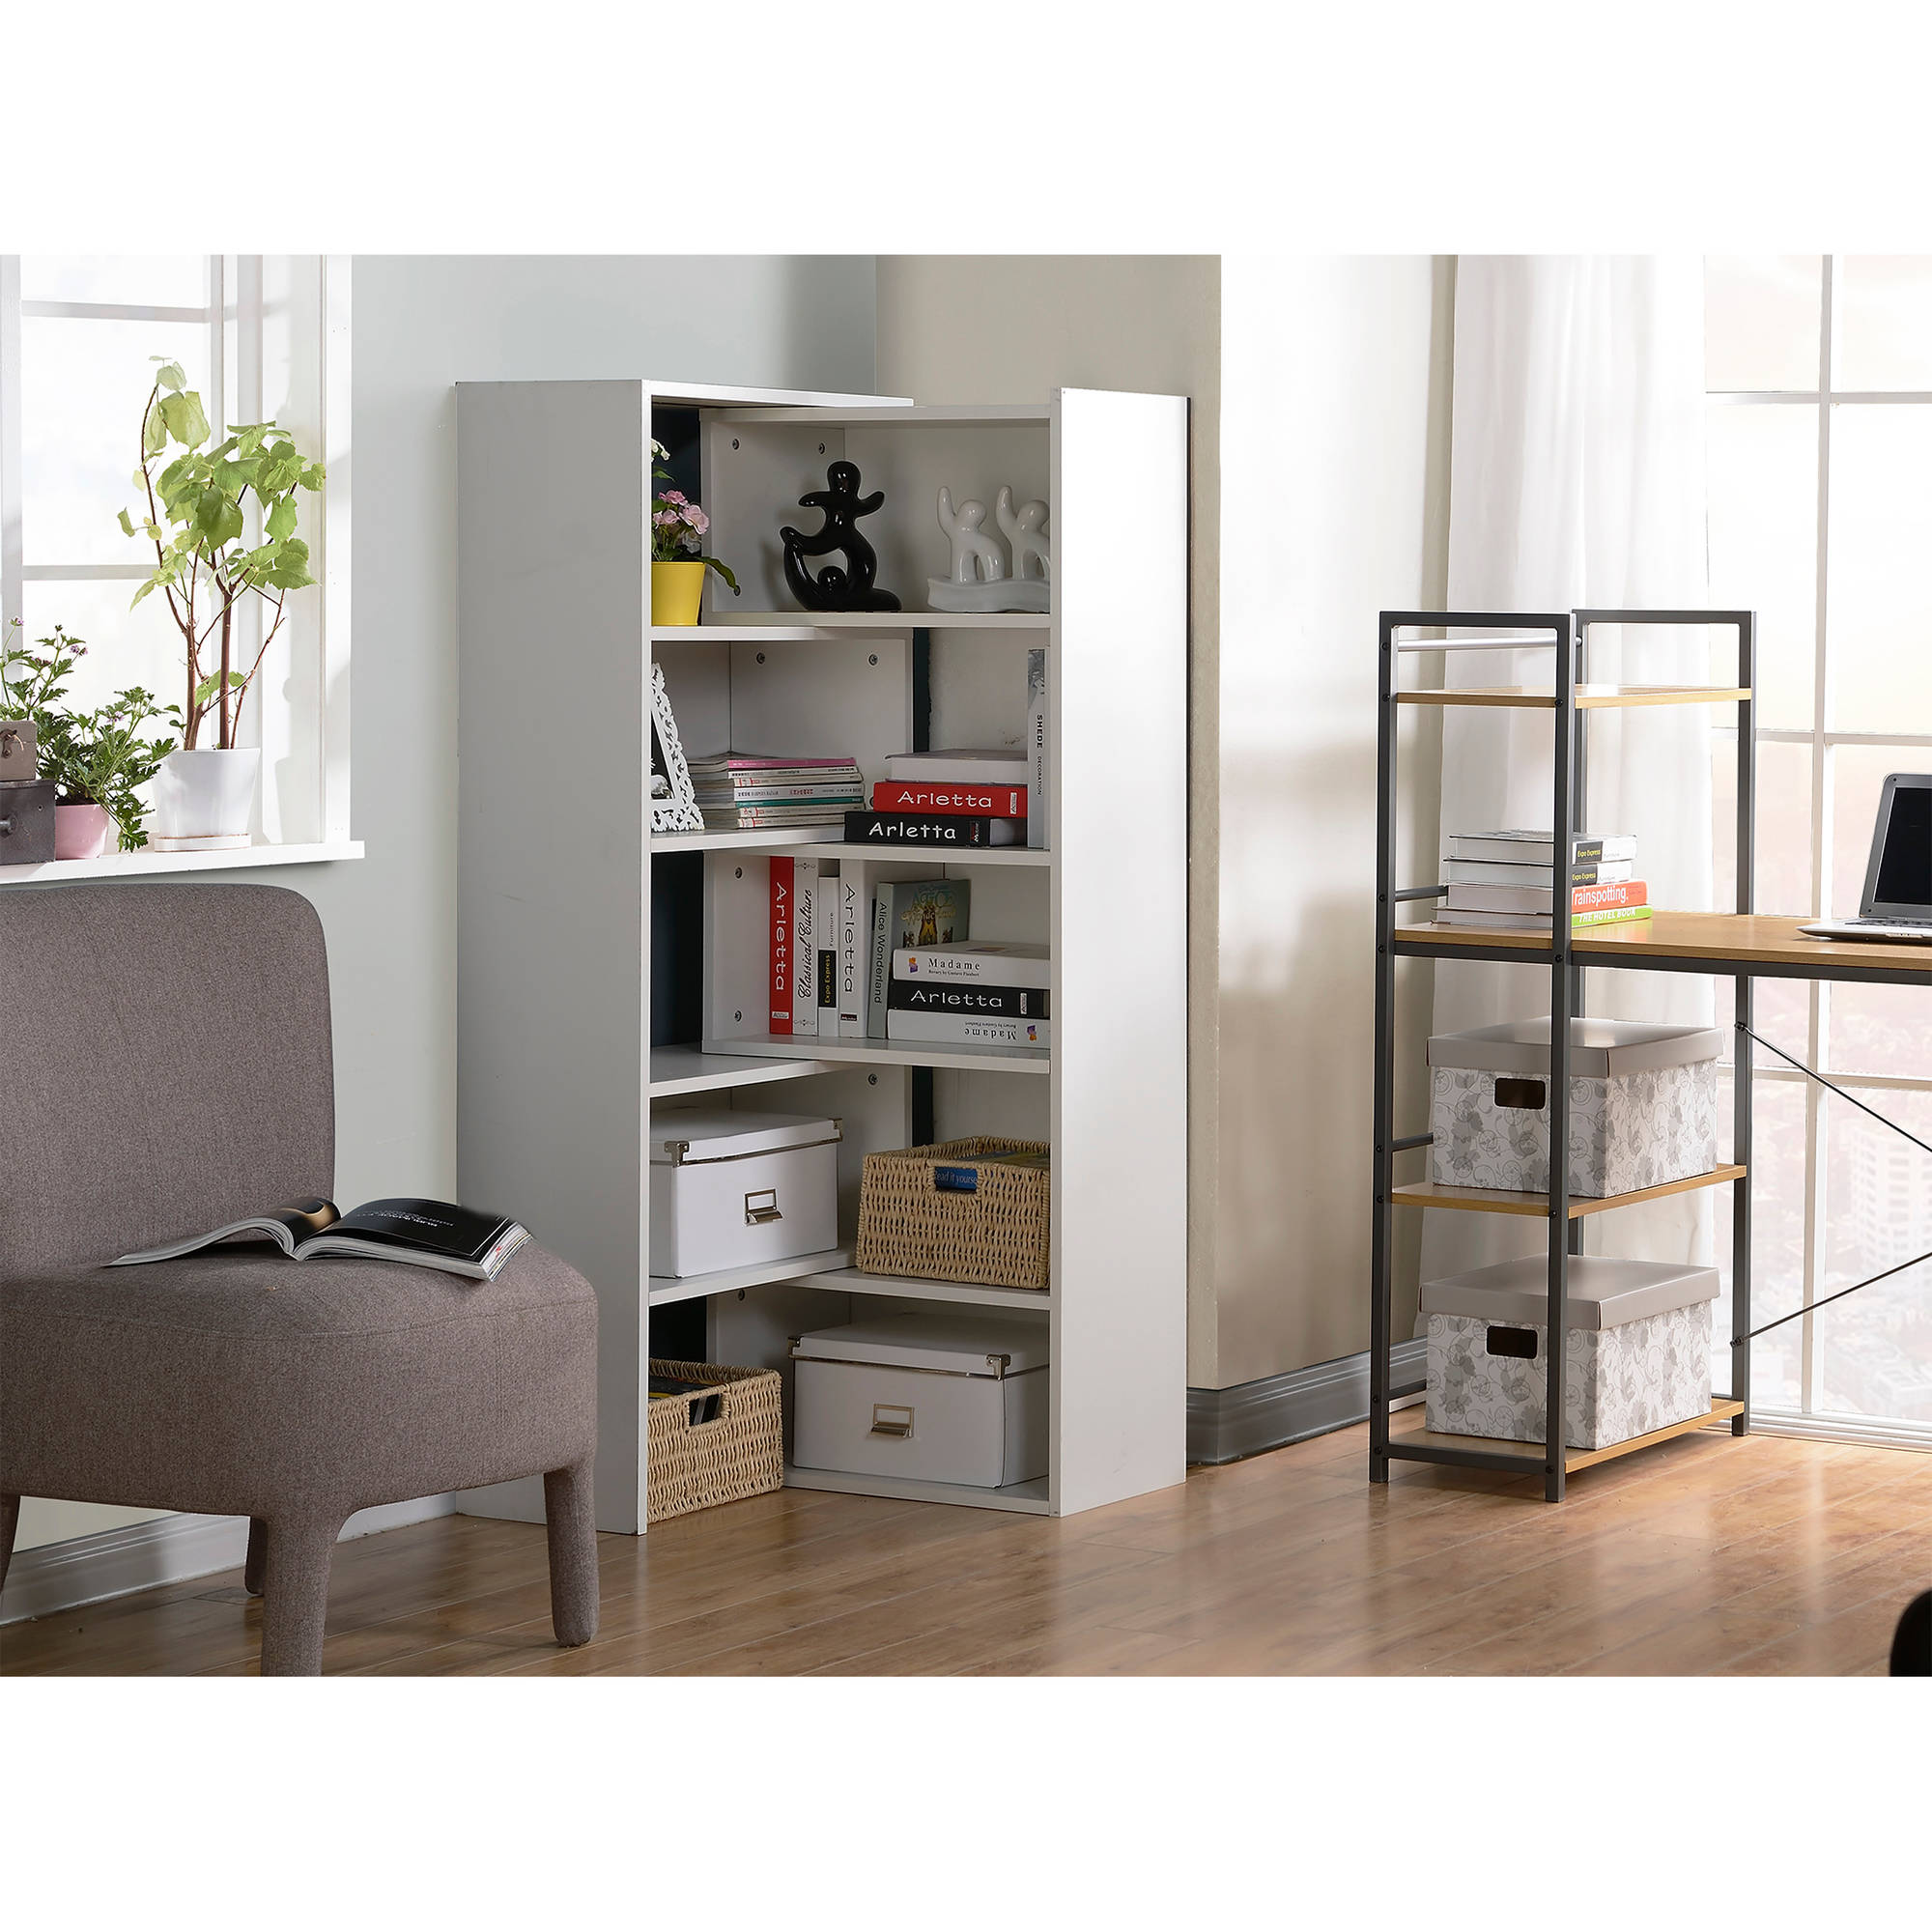 Homestar Flexible and Expandable Shelving Console, White - image 2 of 6